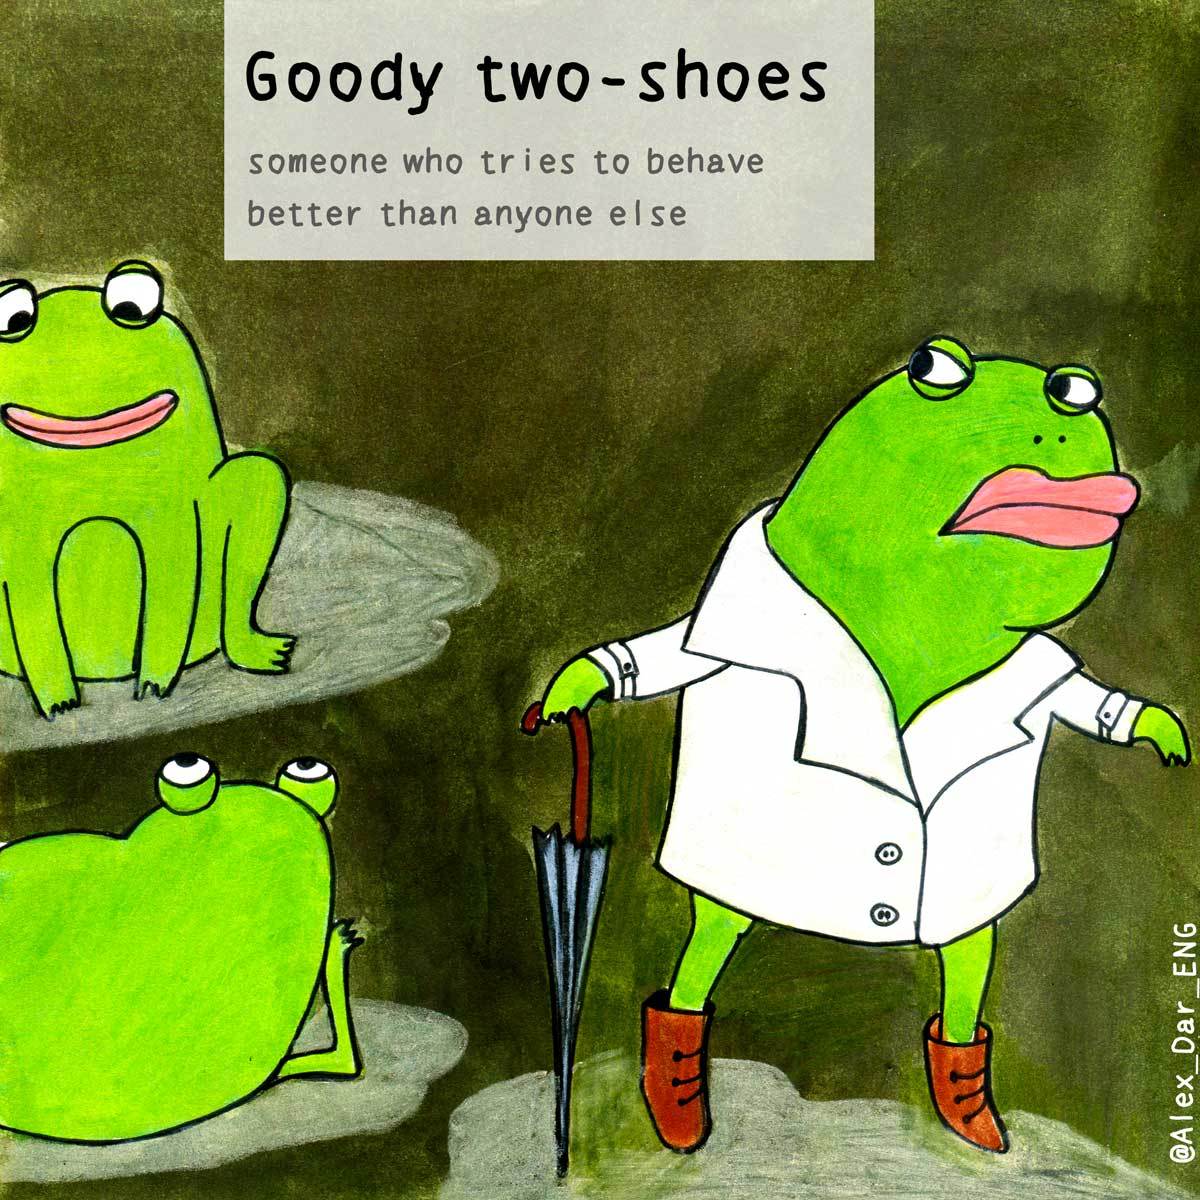 You have been good to me. Little Goody two Shoes персонажи. Little Goody two Shoes продавцы. Little Goody two Shoes Elise.